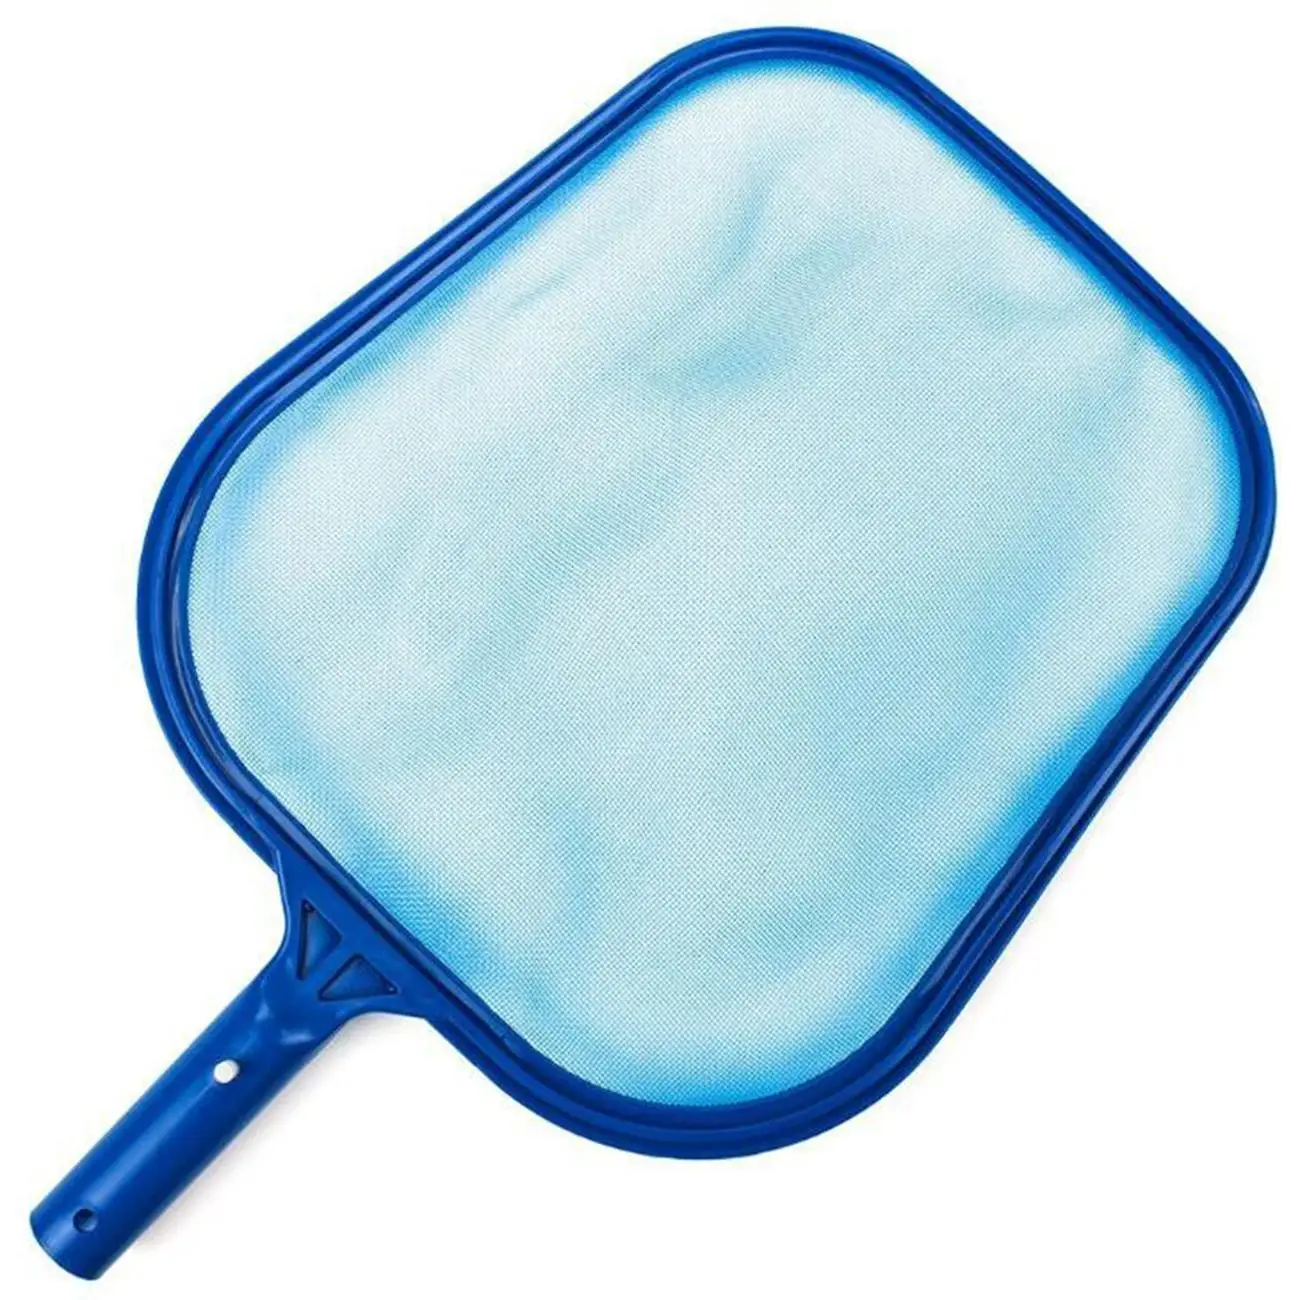 

1pc Blue Pool Cleaning Net Professional Tool Grade Fine Mesh Pool Skimmer Leaf Catcher Bag Pool Swimming Cleaners Accessories